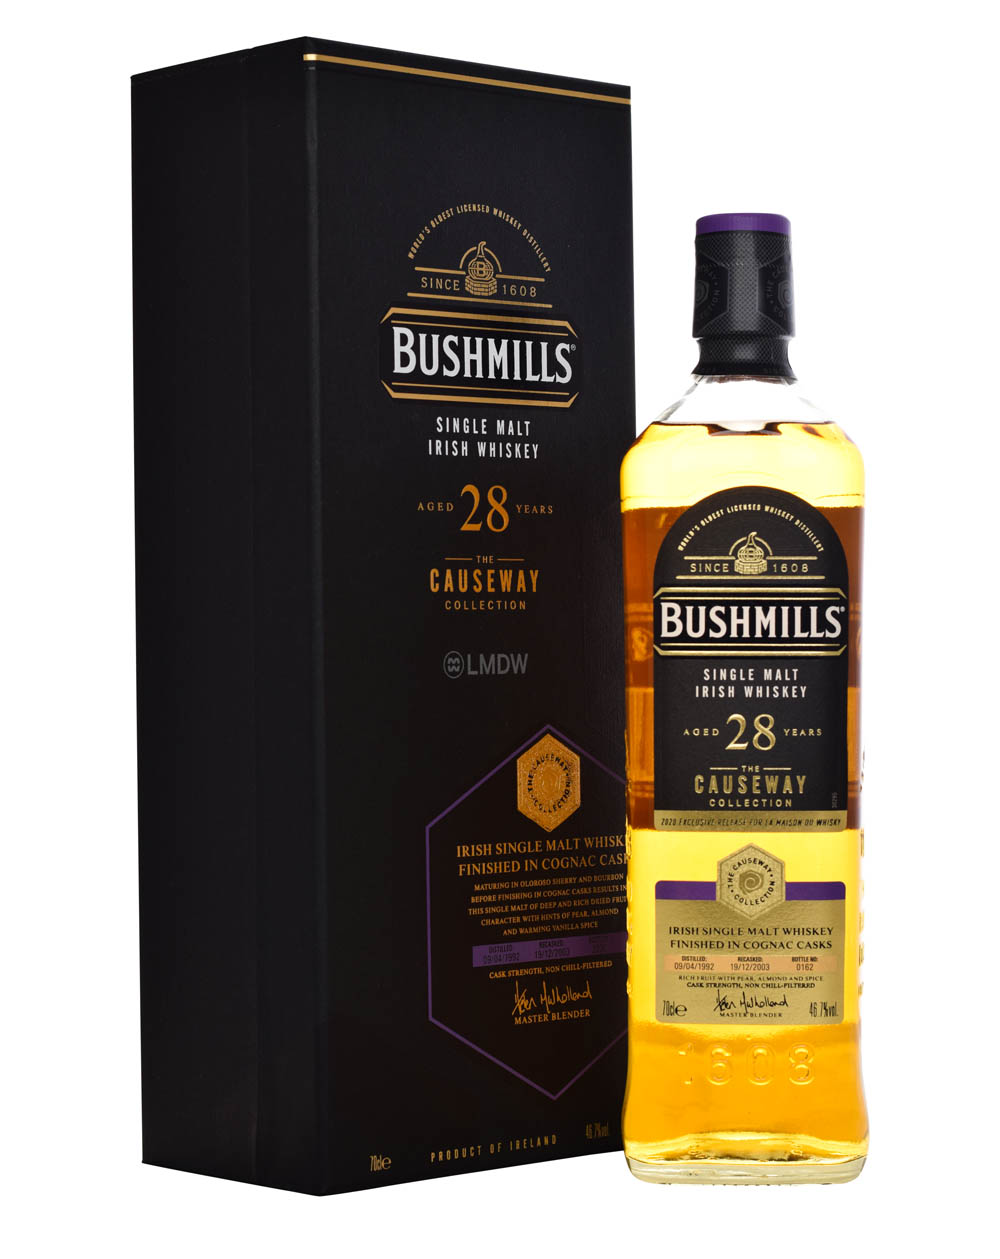 Bushmill 28 Years Old The Causeway Collection 2020 For LMDW Box Musthave Malts MHM